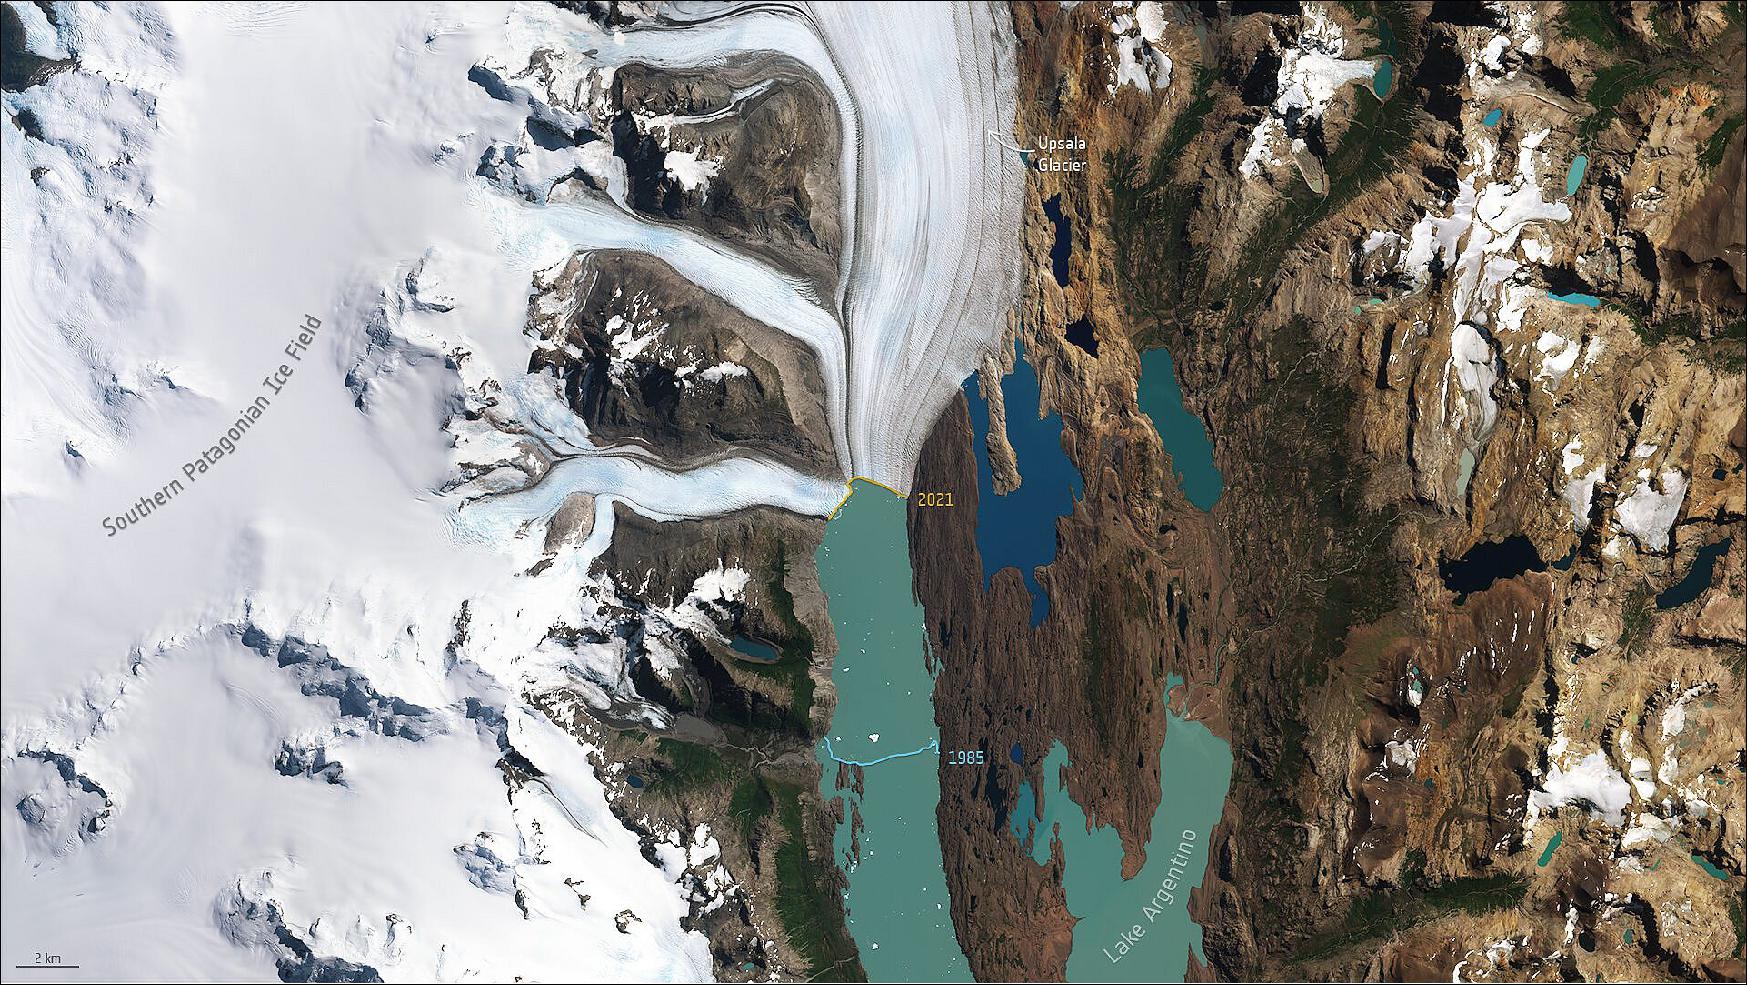 Figure 16: The Upsala Glacier is the third largest glacier in the Southern Patagonian Ice Field. Many glaciers in the Patagonian Ice Field, including Upsala, have been retreating over the last 50 years owing to rising temperatures. Earth observing satellites, including the Copernicus Sentinel-2 mission, have been closely monitoring the Upsala Glacier and have revealed that it has retreated approximately 9 km between 1985 and 2021. Satellite data can help monitor changes in glacier mass and, subsequently, their contribution to rising sea levels (image credit: ESA, the image contains modified Copernicus Sentinel data (2021), processed by ESA, CC BY-SA 3.0 IGO)